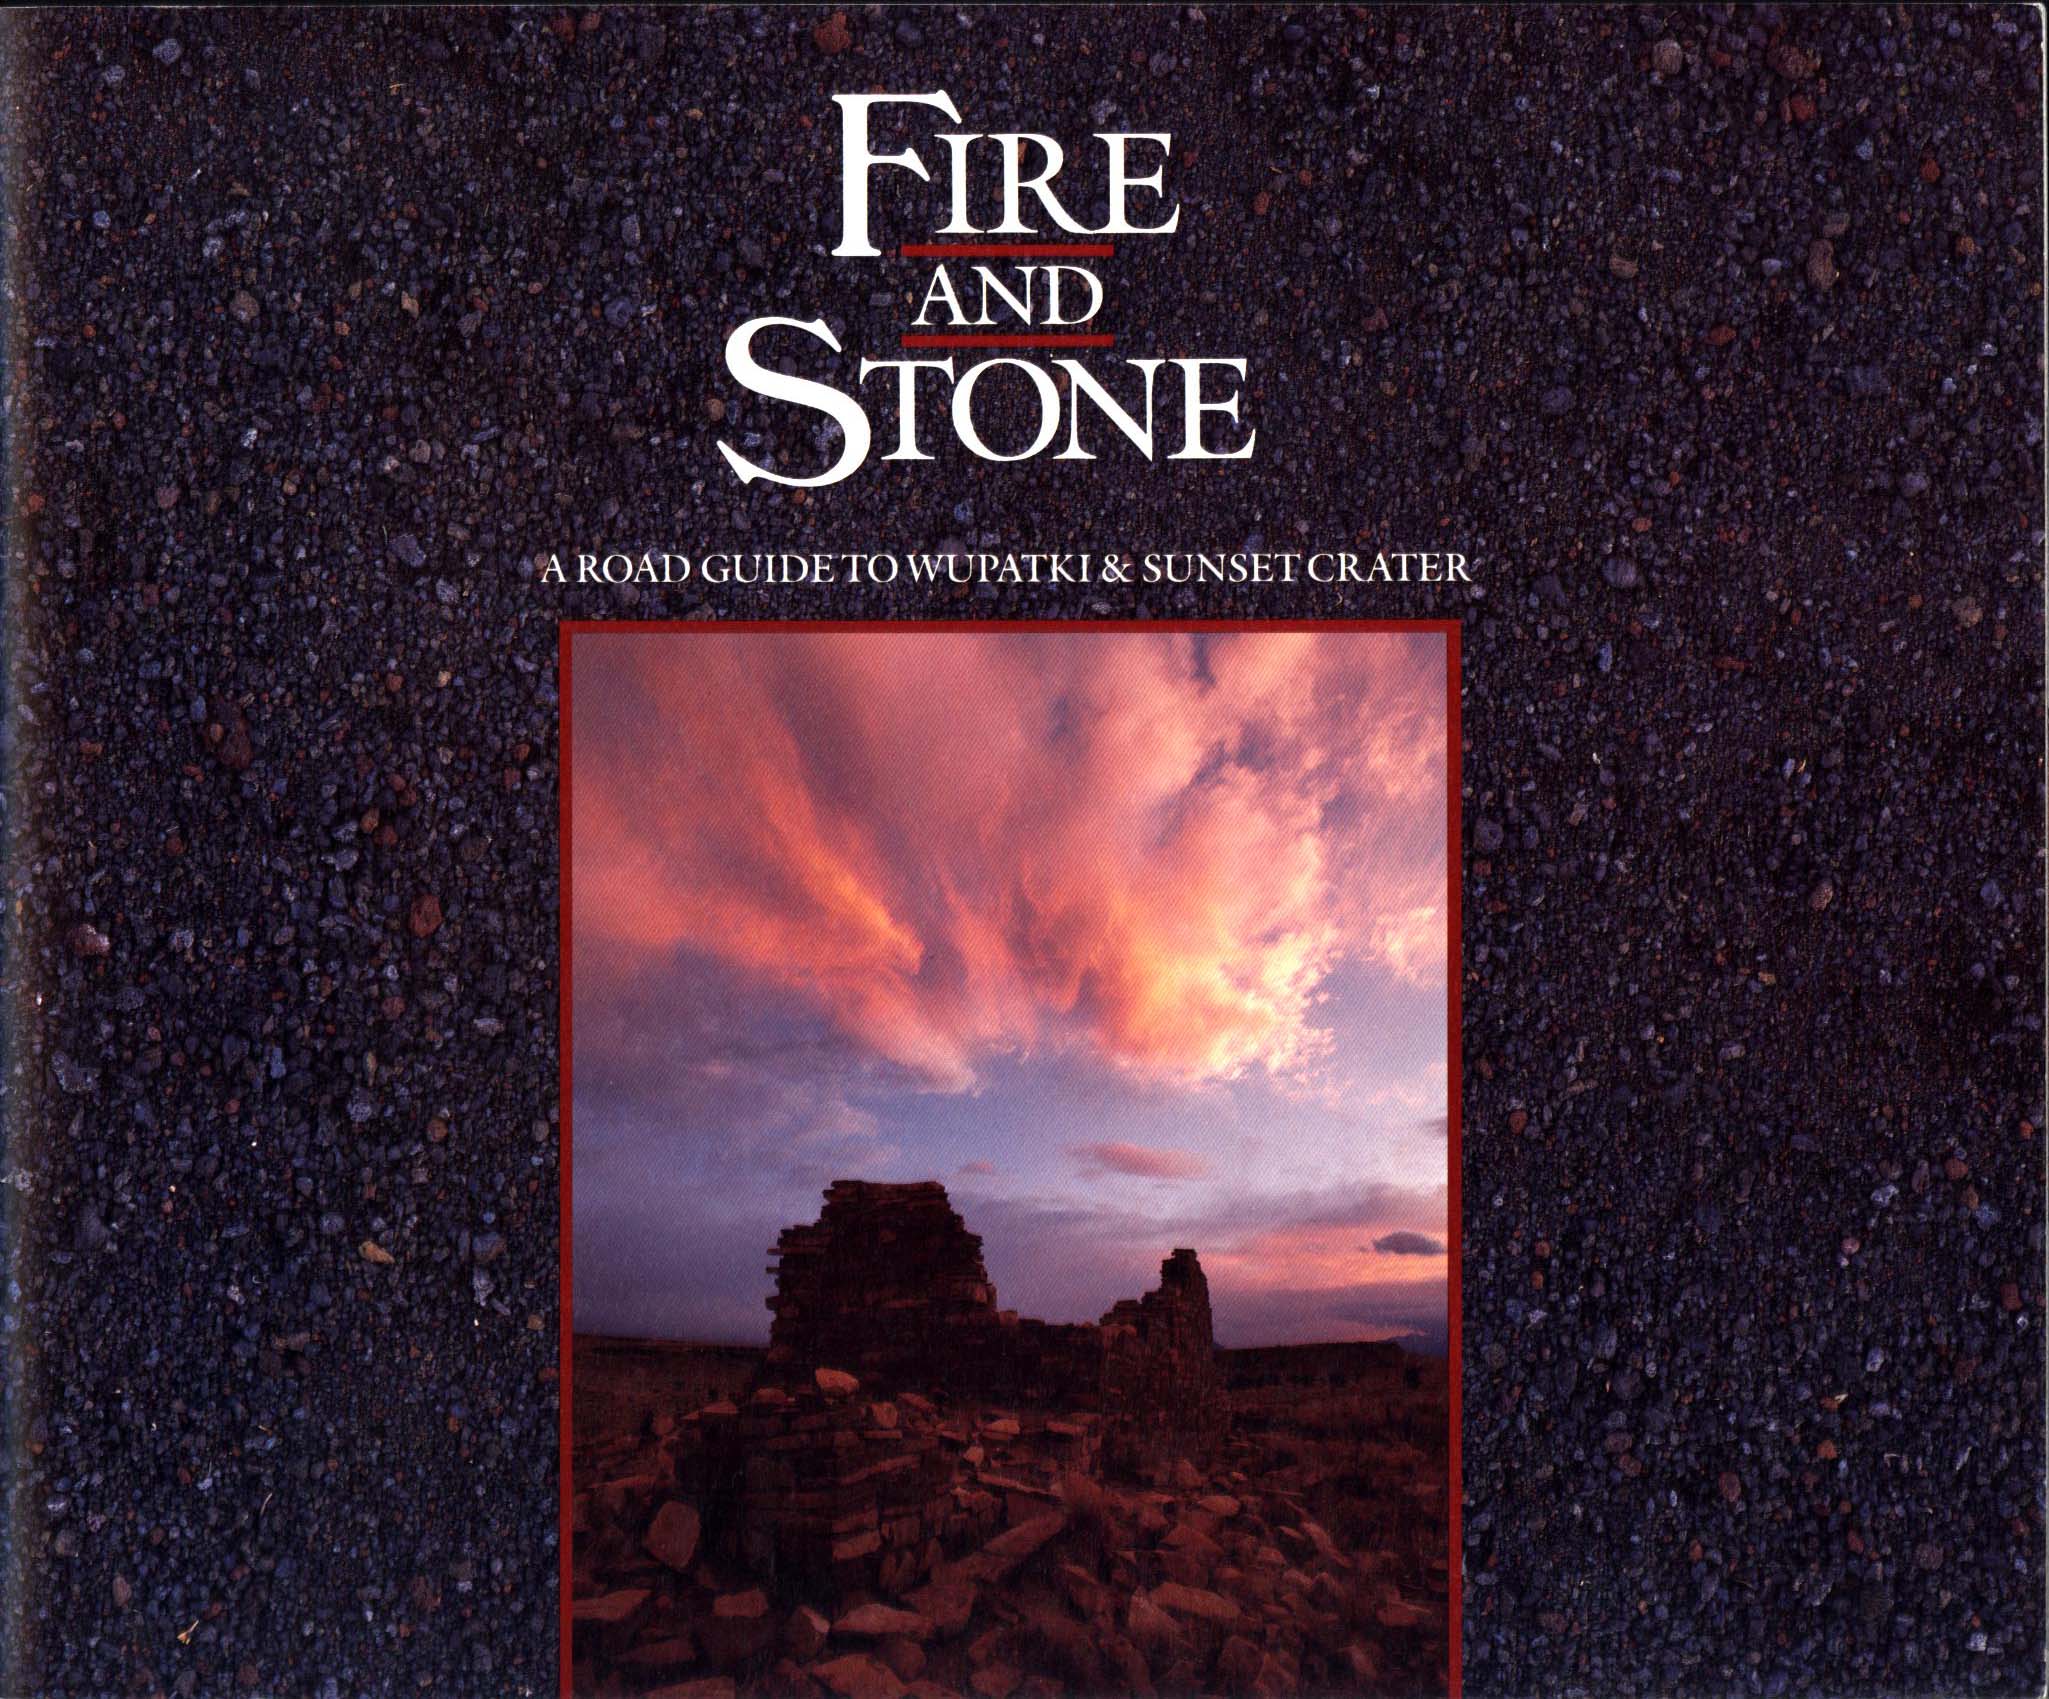 FIRE AND STONE: a road guide to Wupatki & Sunset Crater National Monuments. 